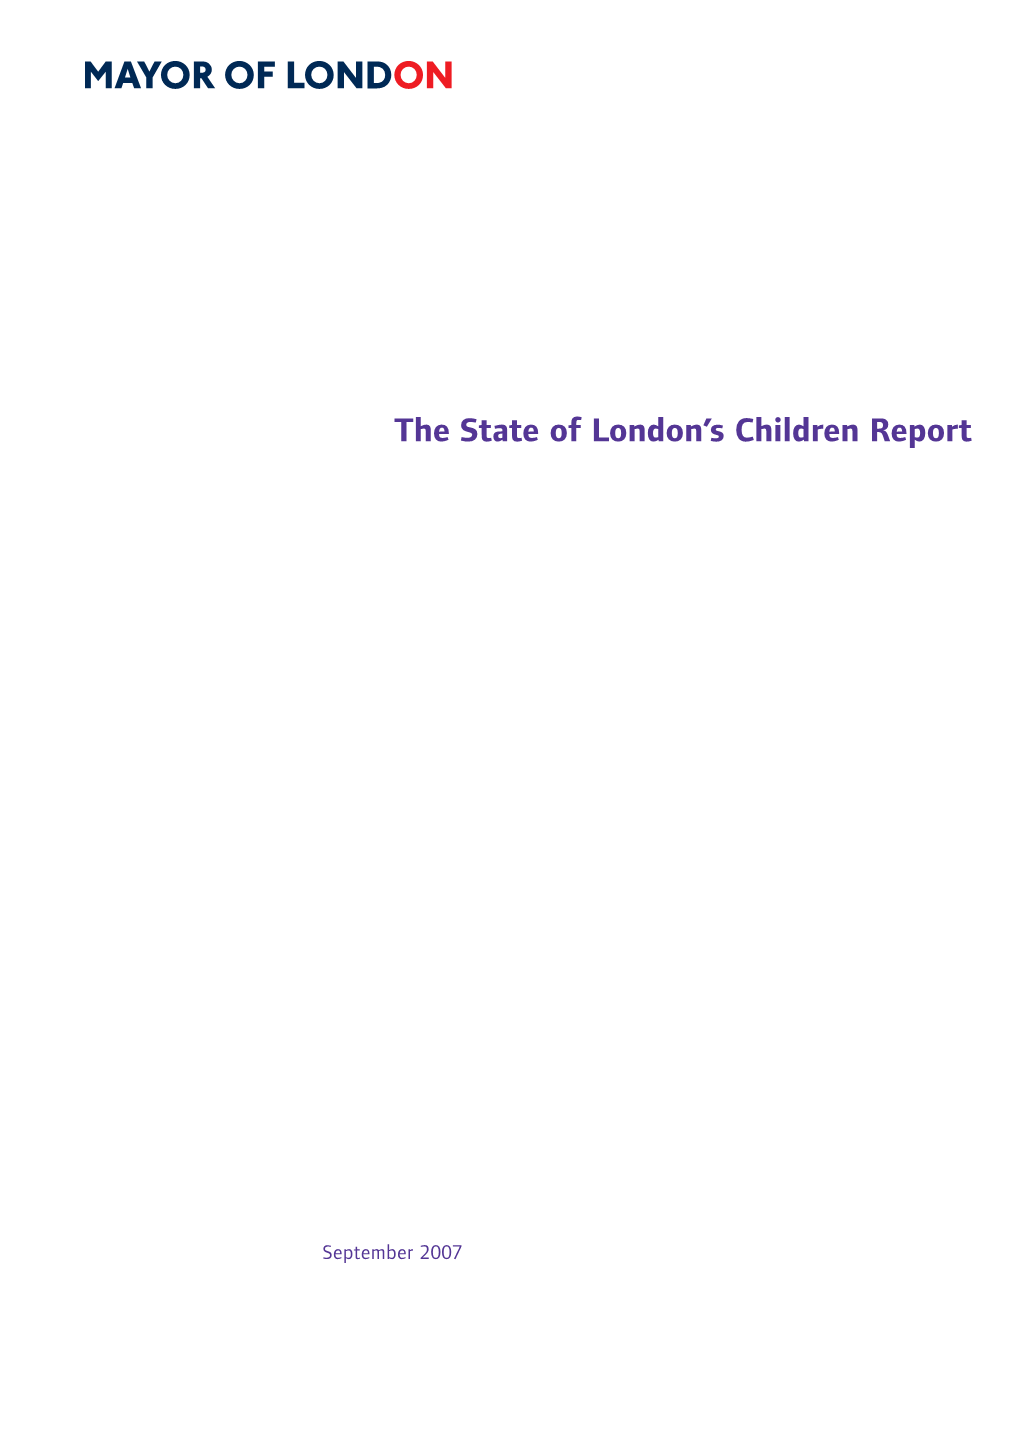 The State of London's Children Report, DMSS 2007